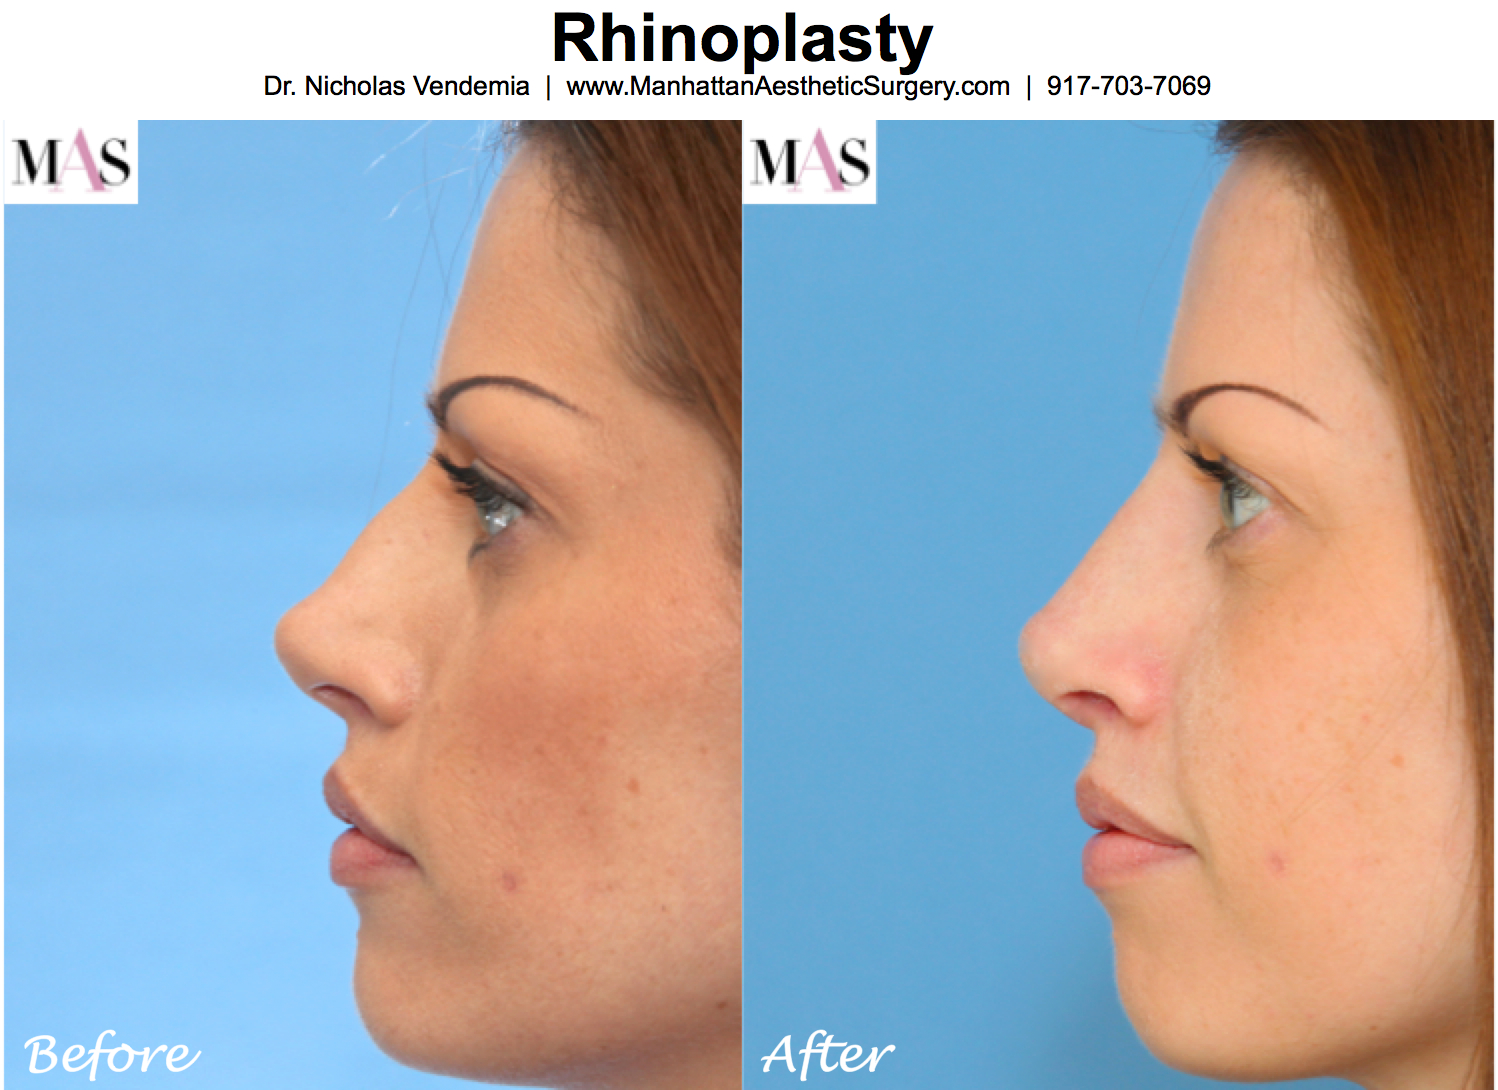 Nose surgery in New York by Rhinoplasty expert Dr. Nicholas Vendemia of MAS